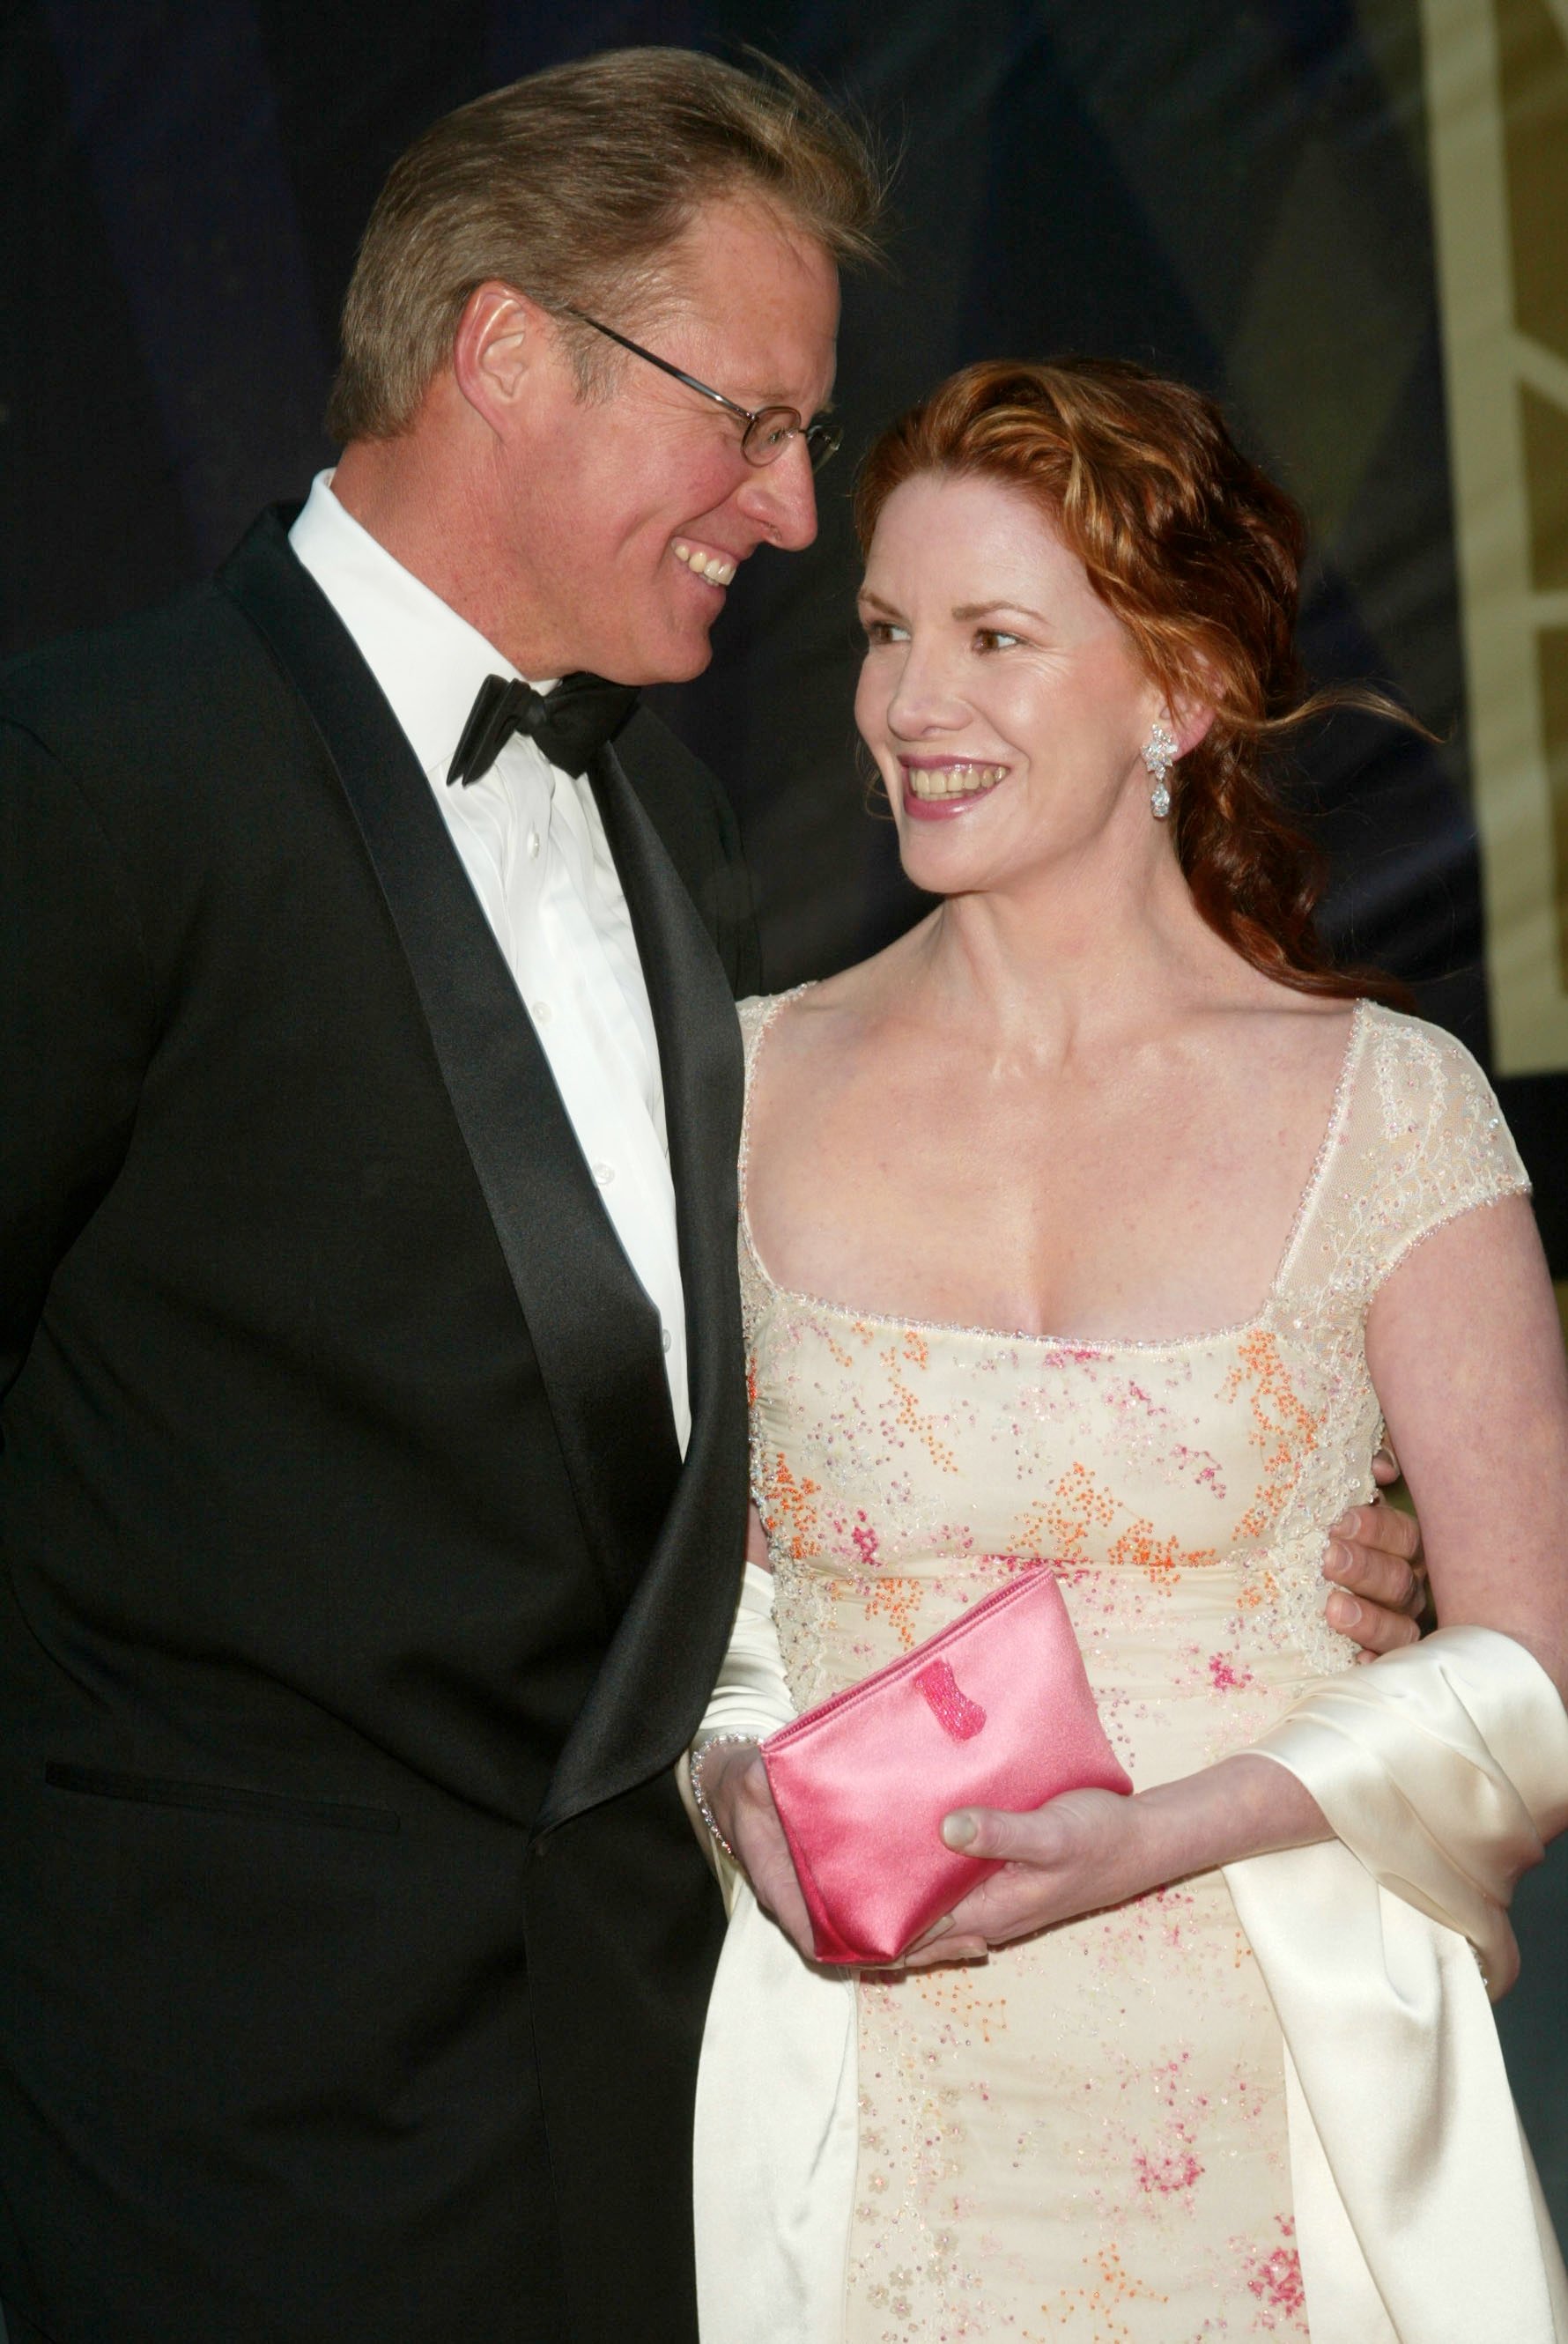 Melissa Gilbert with husband Bruce Boxleitner arriving at the NBC 75th Anniversary Celebration at Rockefeller Plaza in New York City.